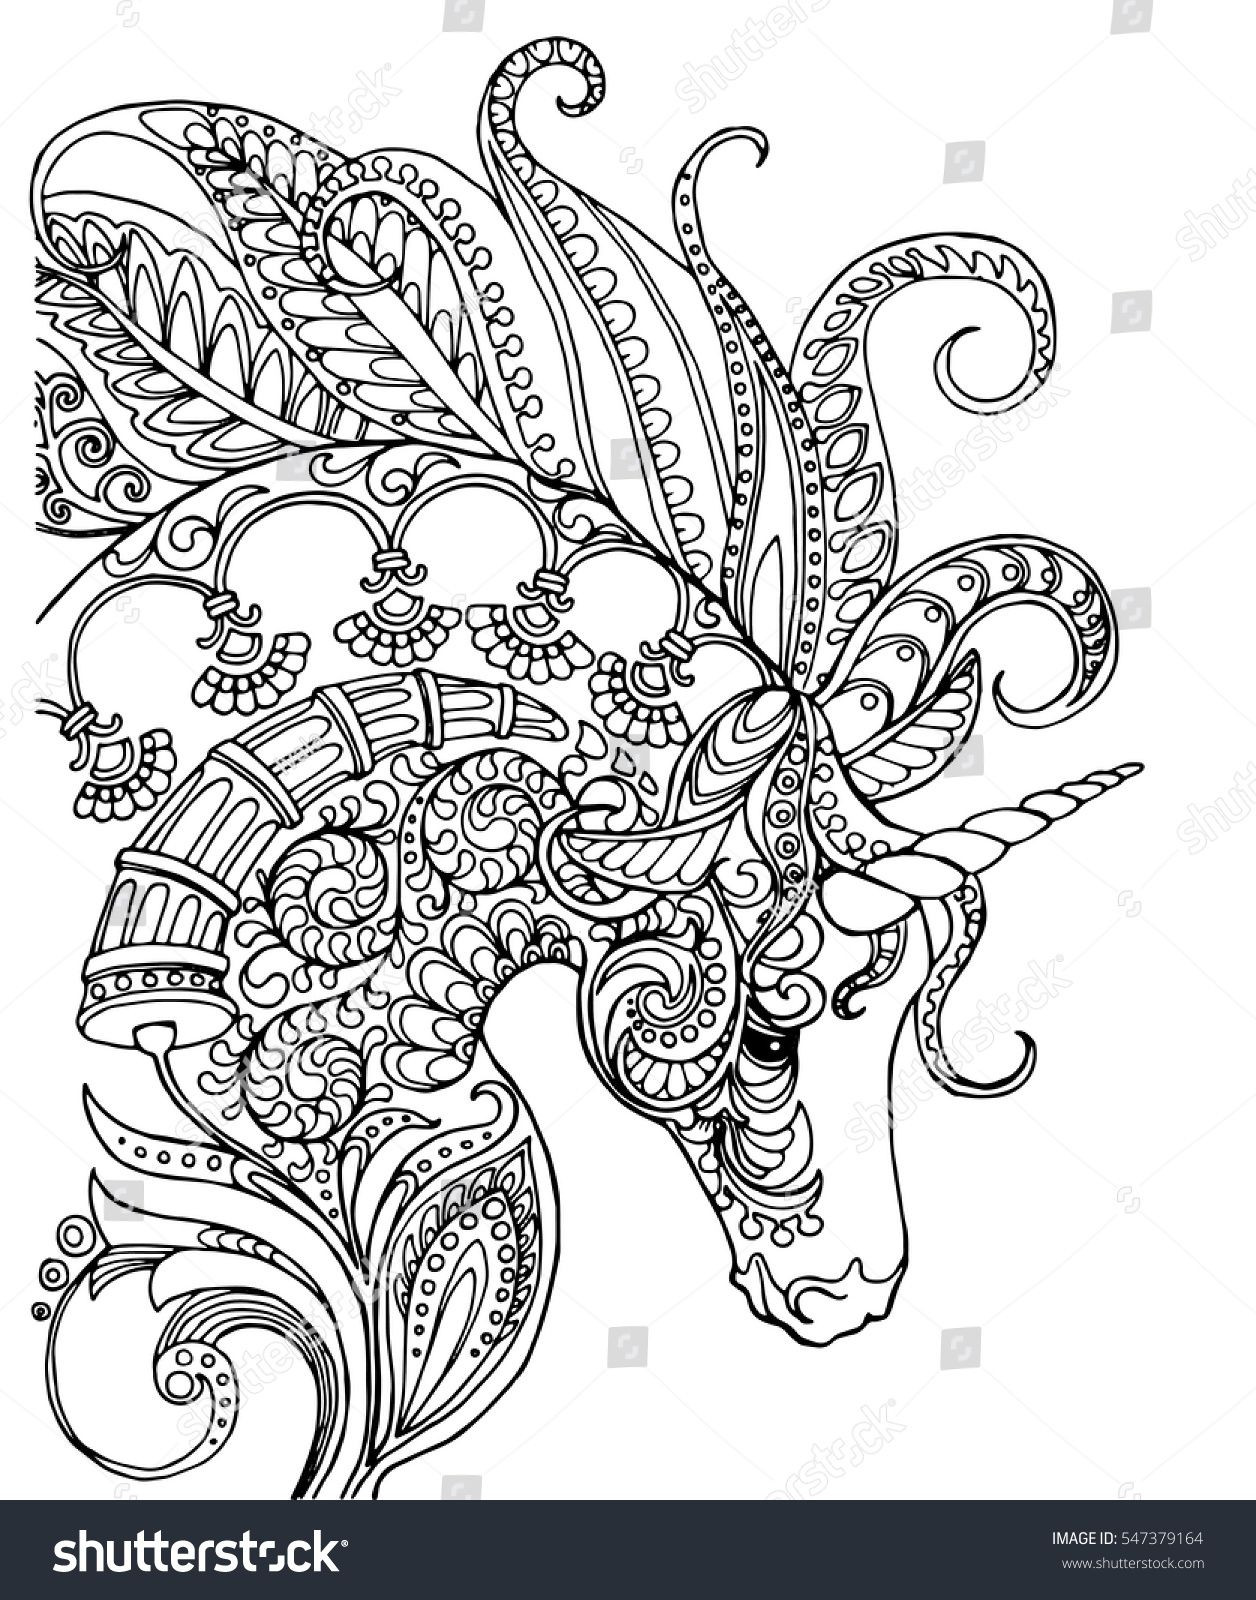 Unicorn Adult Coloring Book
 Elegant zentangle patterned unicorn doodle page for adult